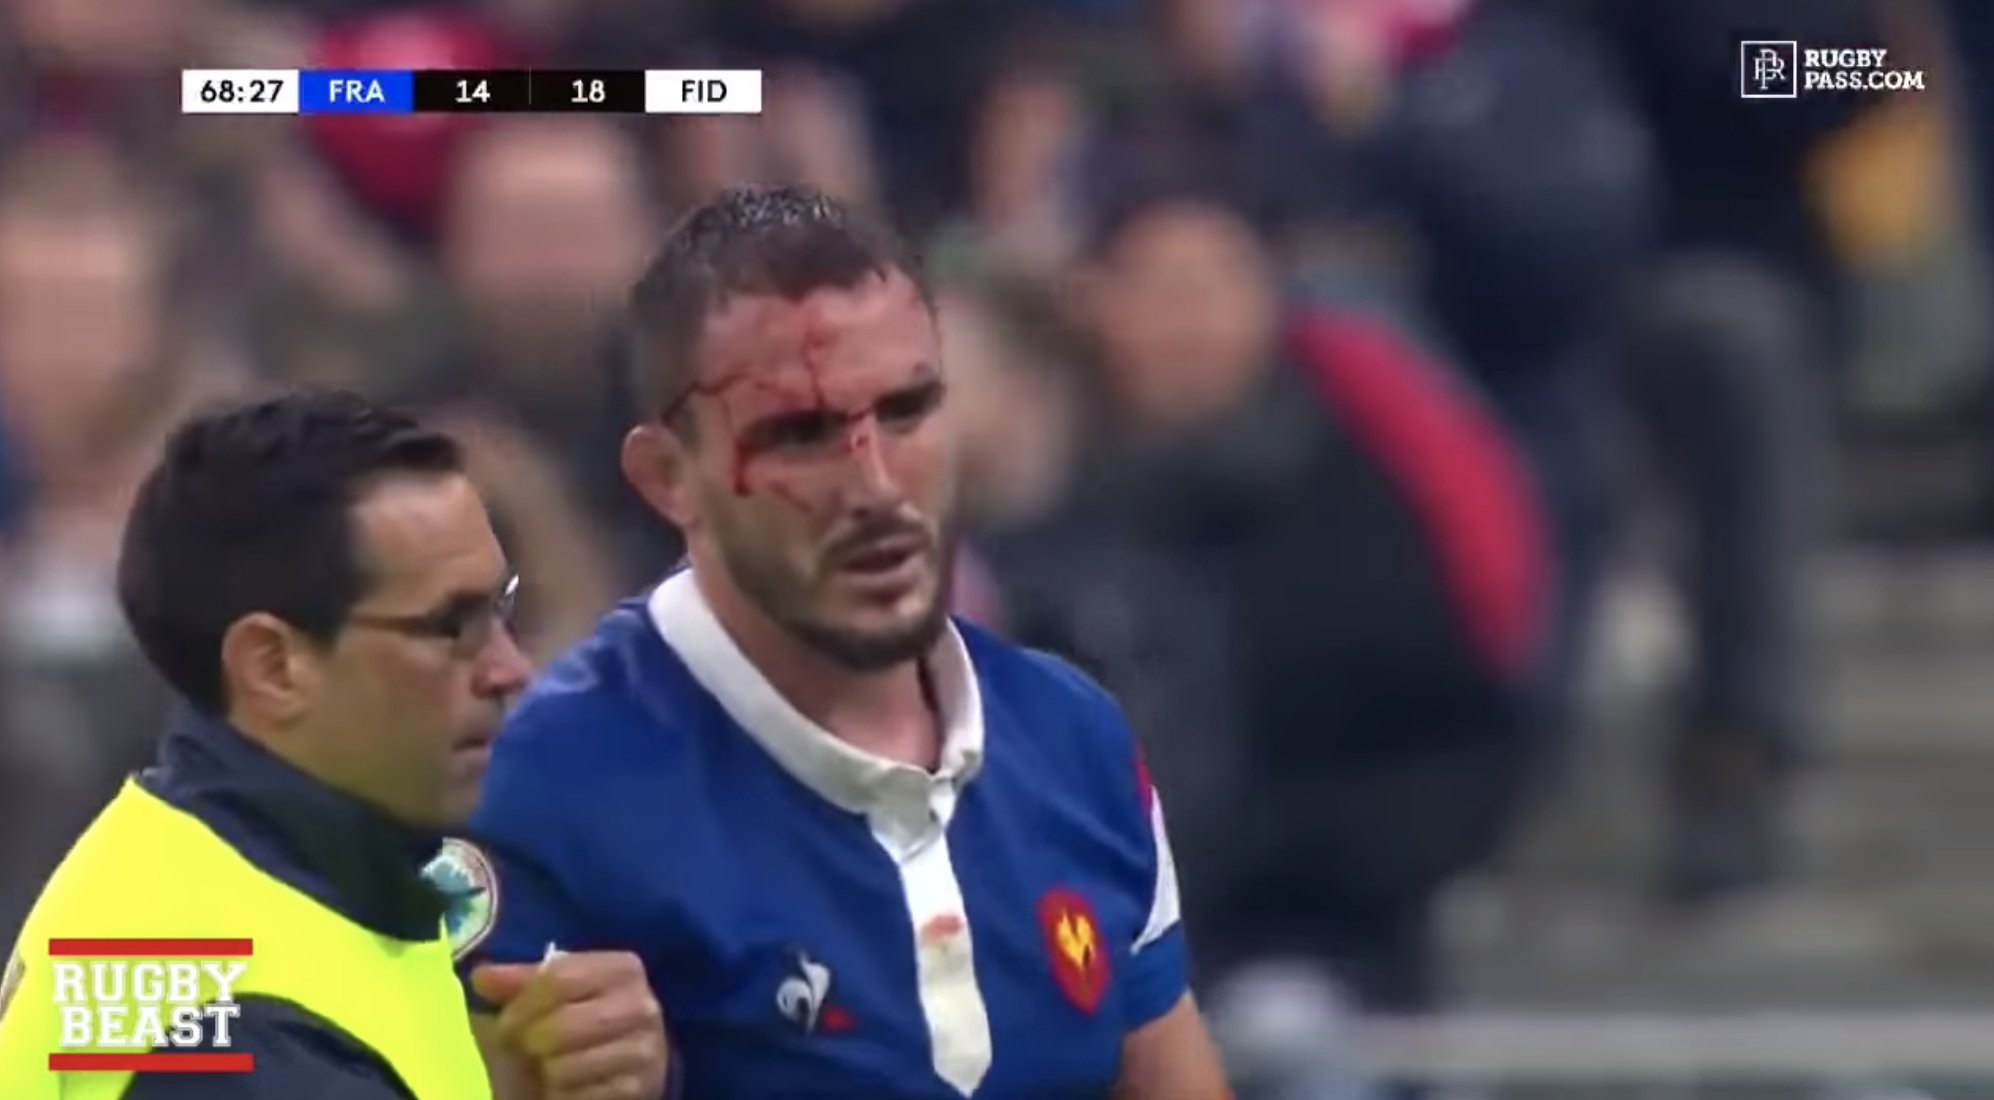 FOOTAGE: New video reveals how BRUTAL the hits were in France vs Fiji match